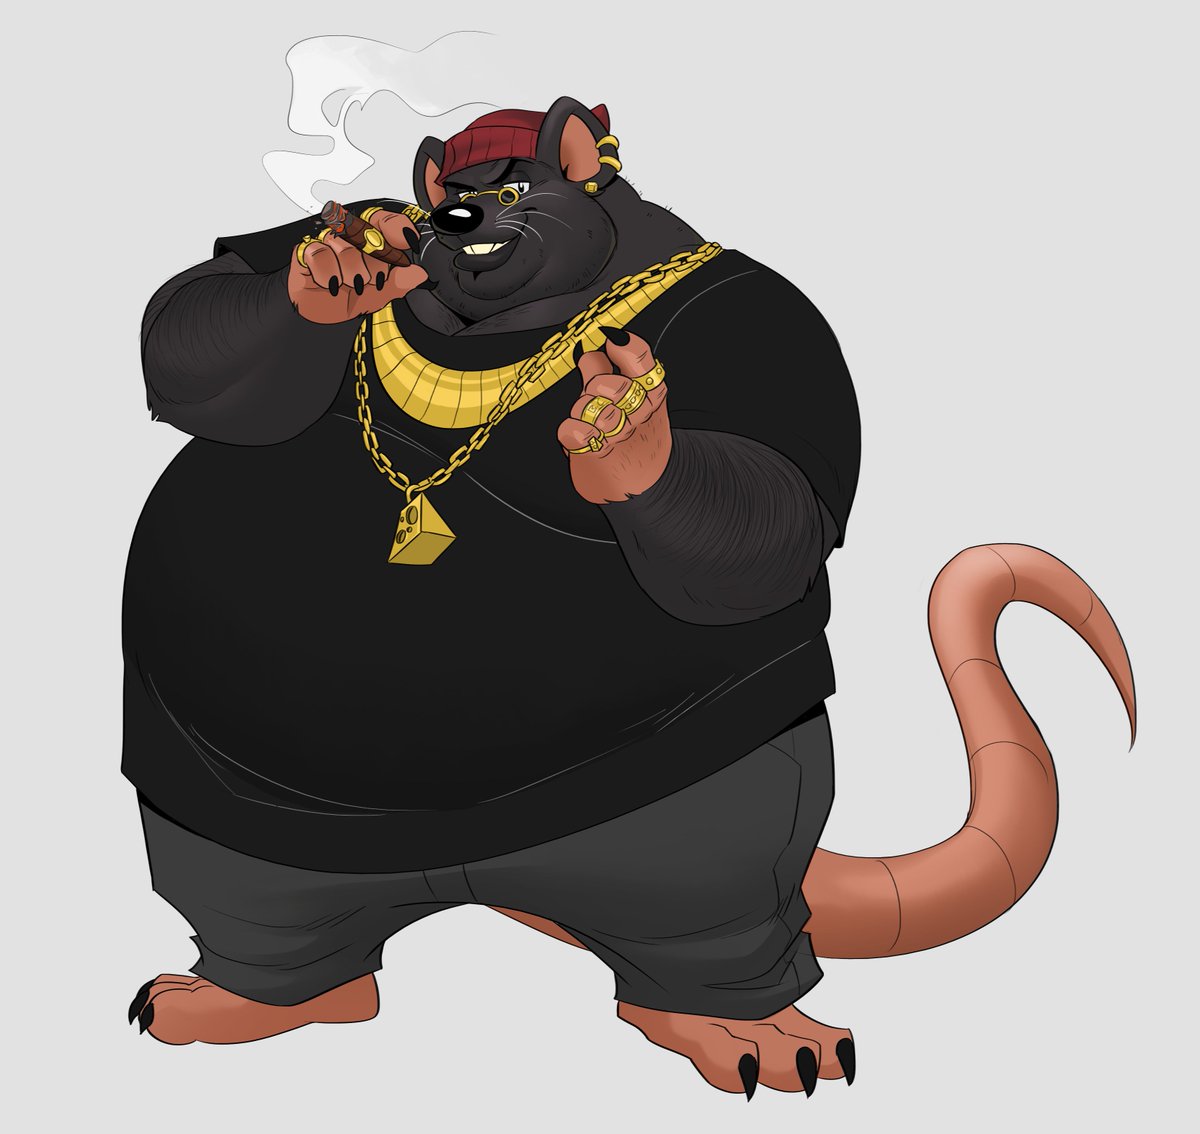 The big rat that makes all the rules